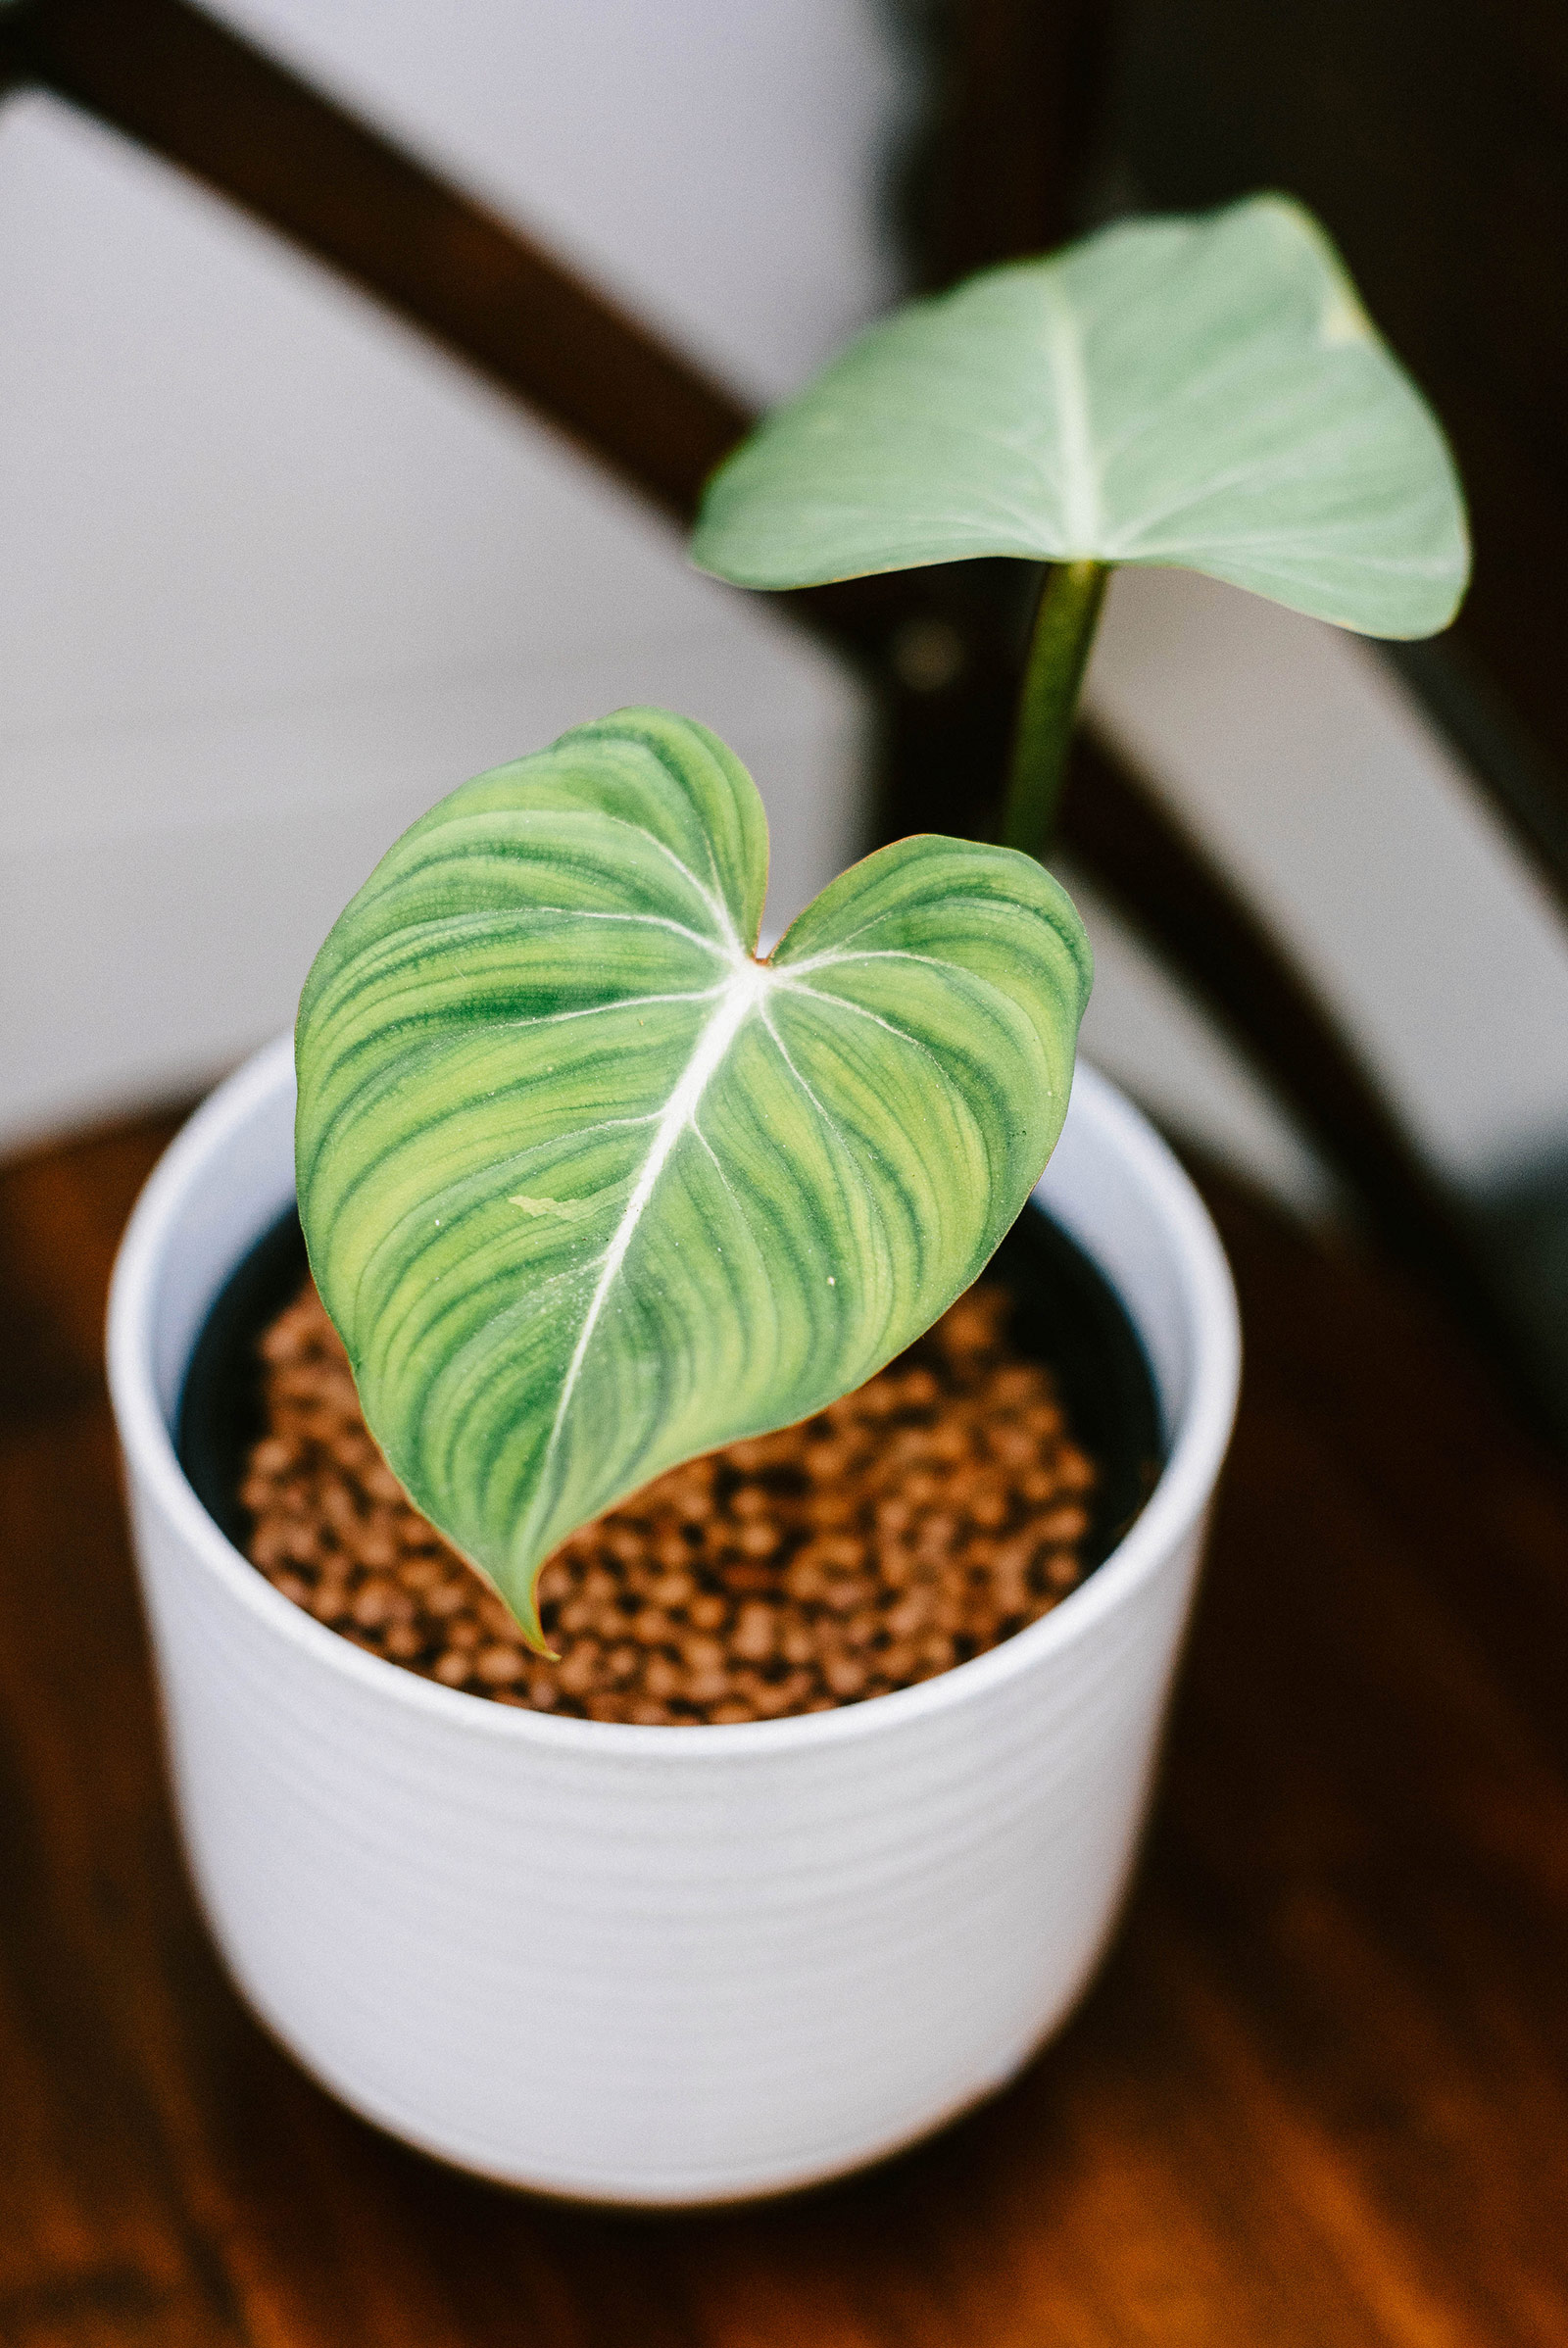 Small Philodendron gloriosum houseplant in a white ceramic pot on a wooden table